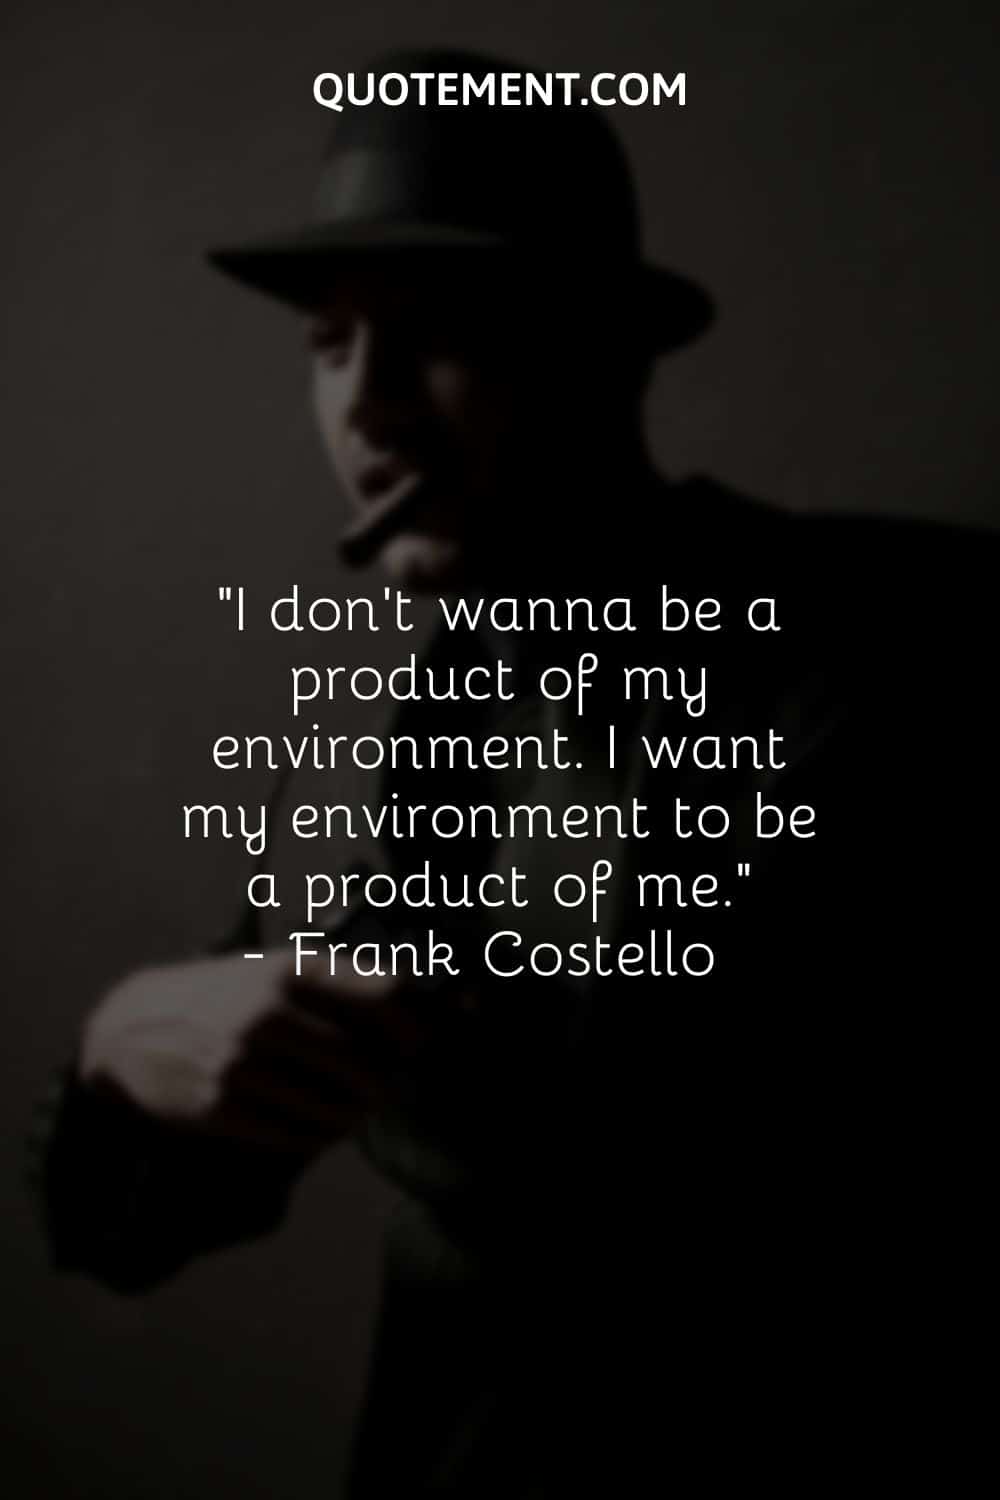 I don’t wanna be a product of my environment. I want my environment to be a product of me.